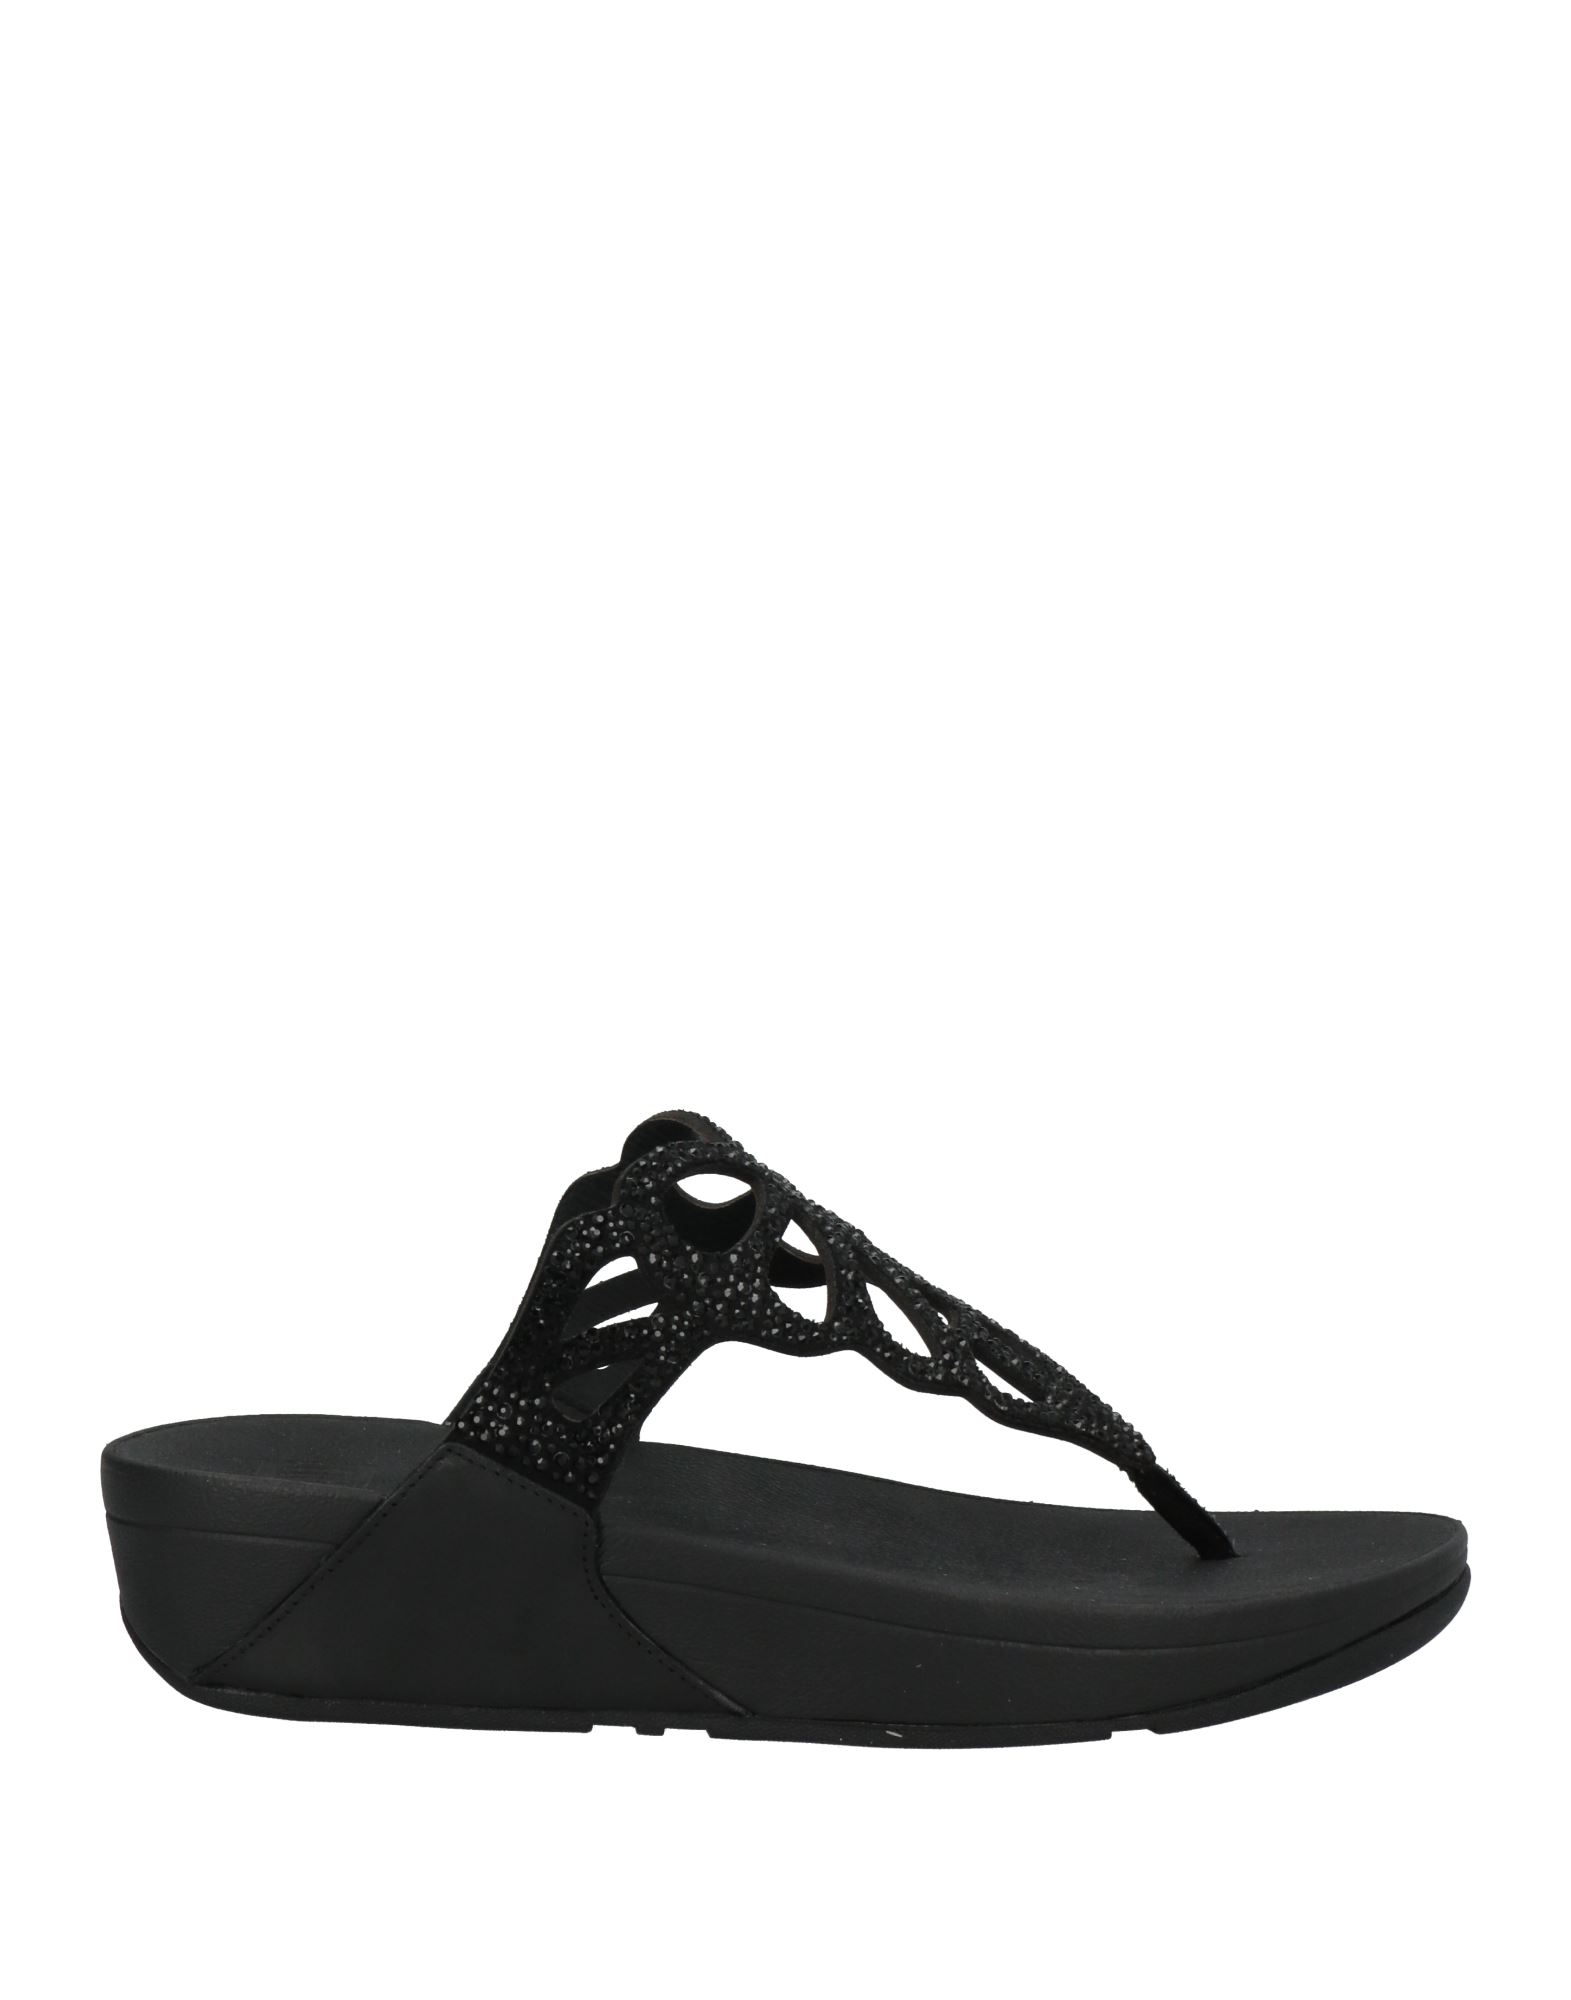 Fitflop Toe Strap Sandals In Black